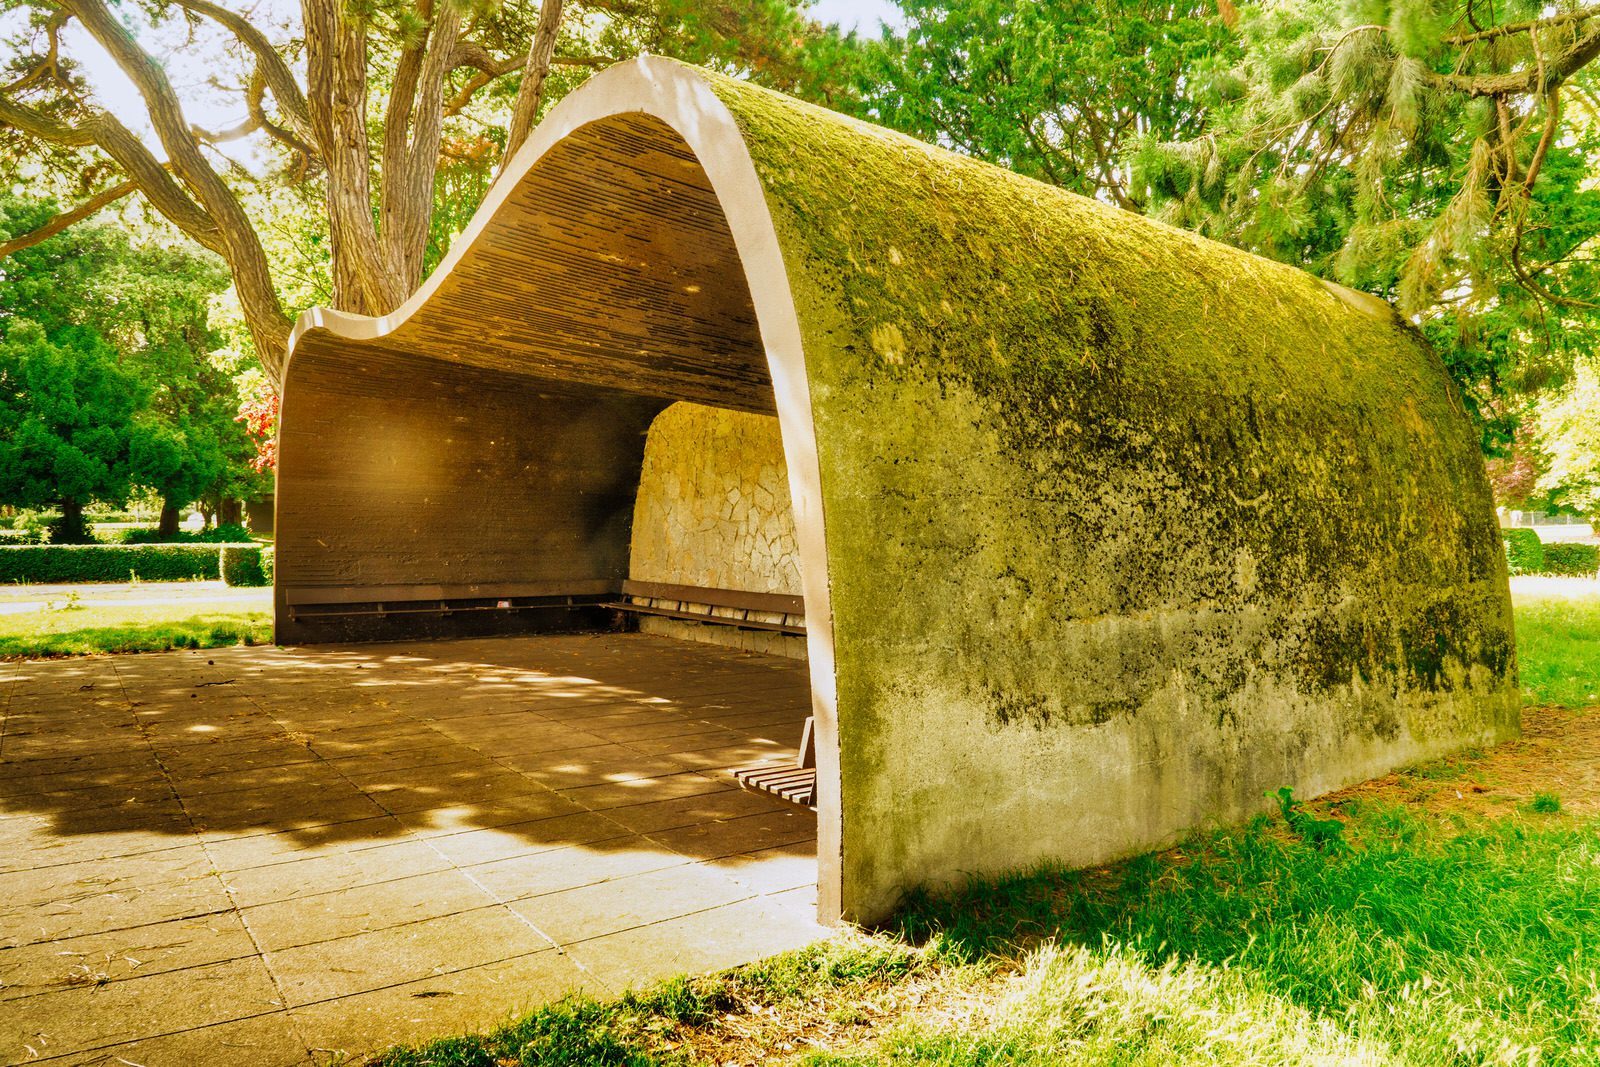 THE CONCRETE SHELTER IN PHOENIX PARK [LOCATED IN THE PEOPLE'S FLOWER GARDENS] 009